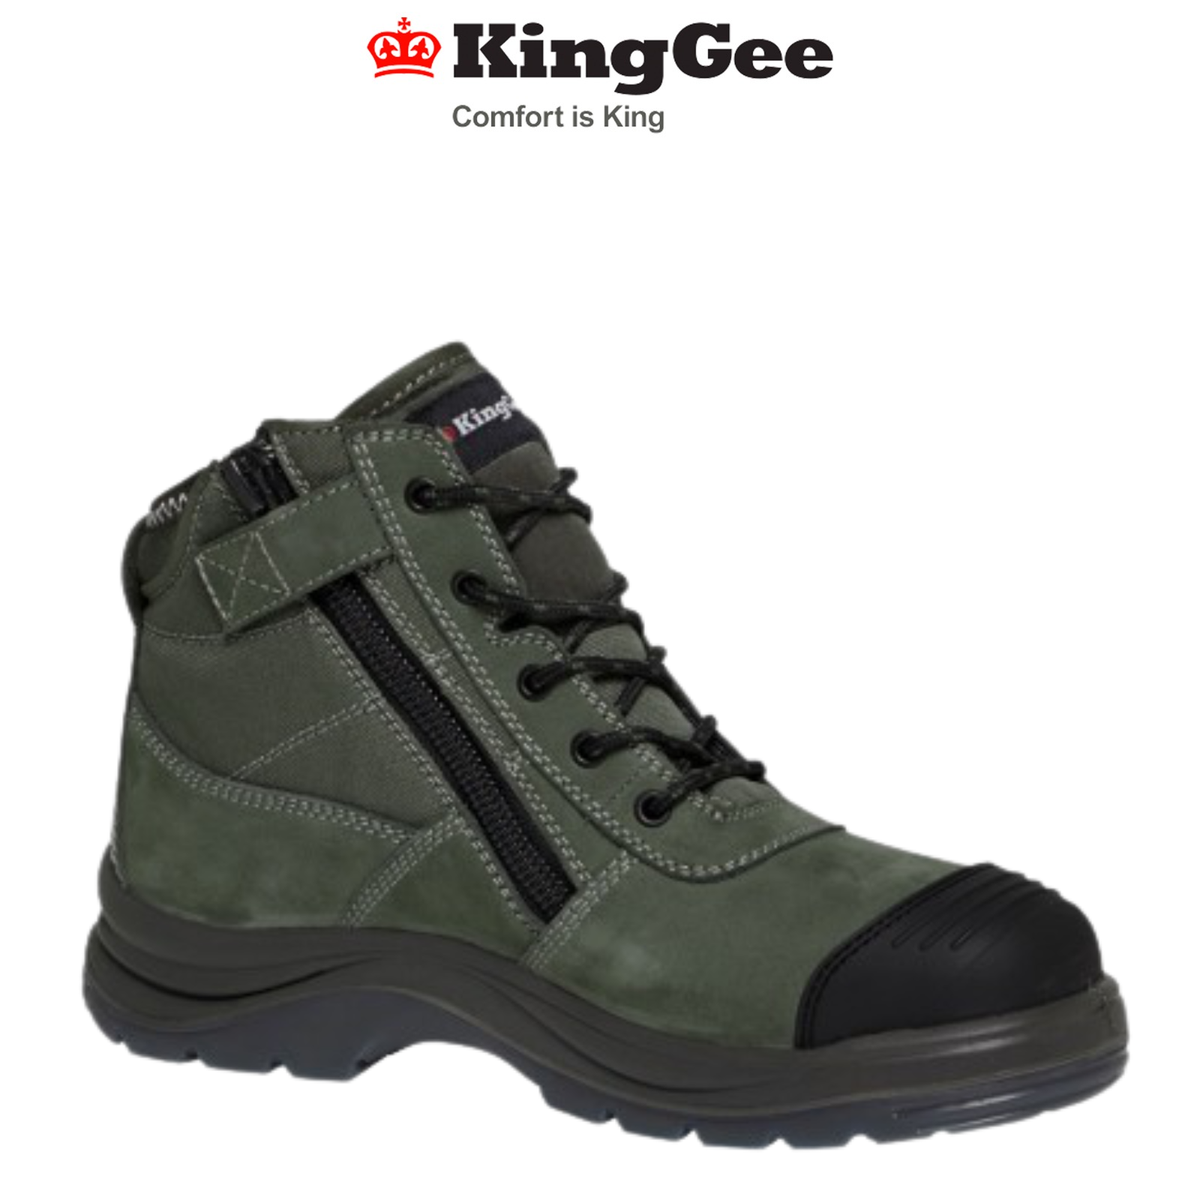 KingGee Mens Tradie Boots Safety Side Zip Work Boot Breathable Leather K27110